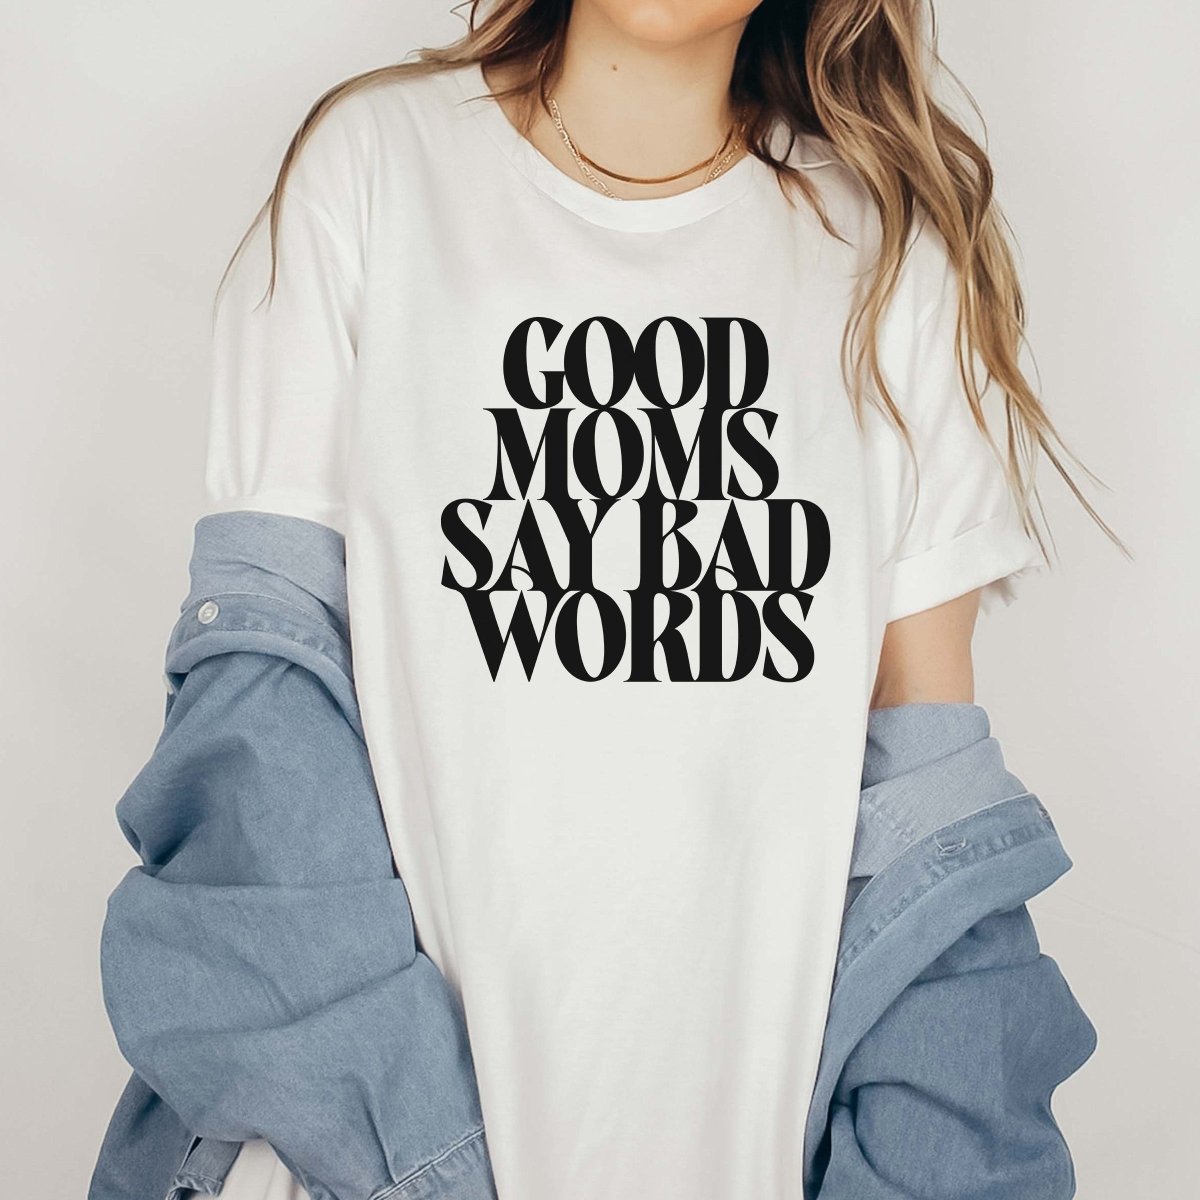 Good Moms say bad Words Wholesale Tee - Limeberry Designs